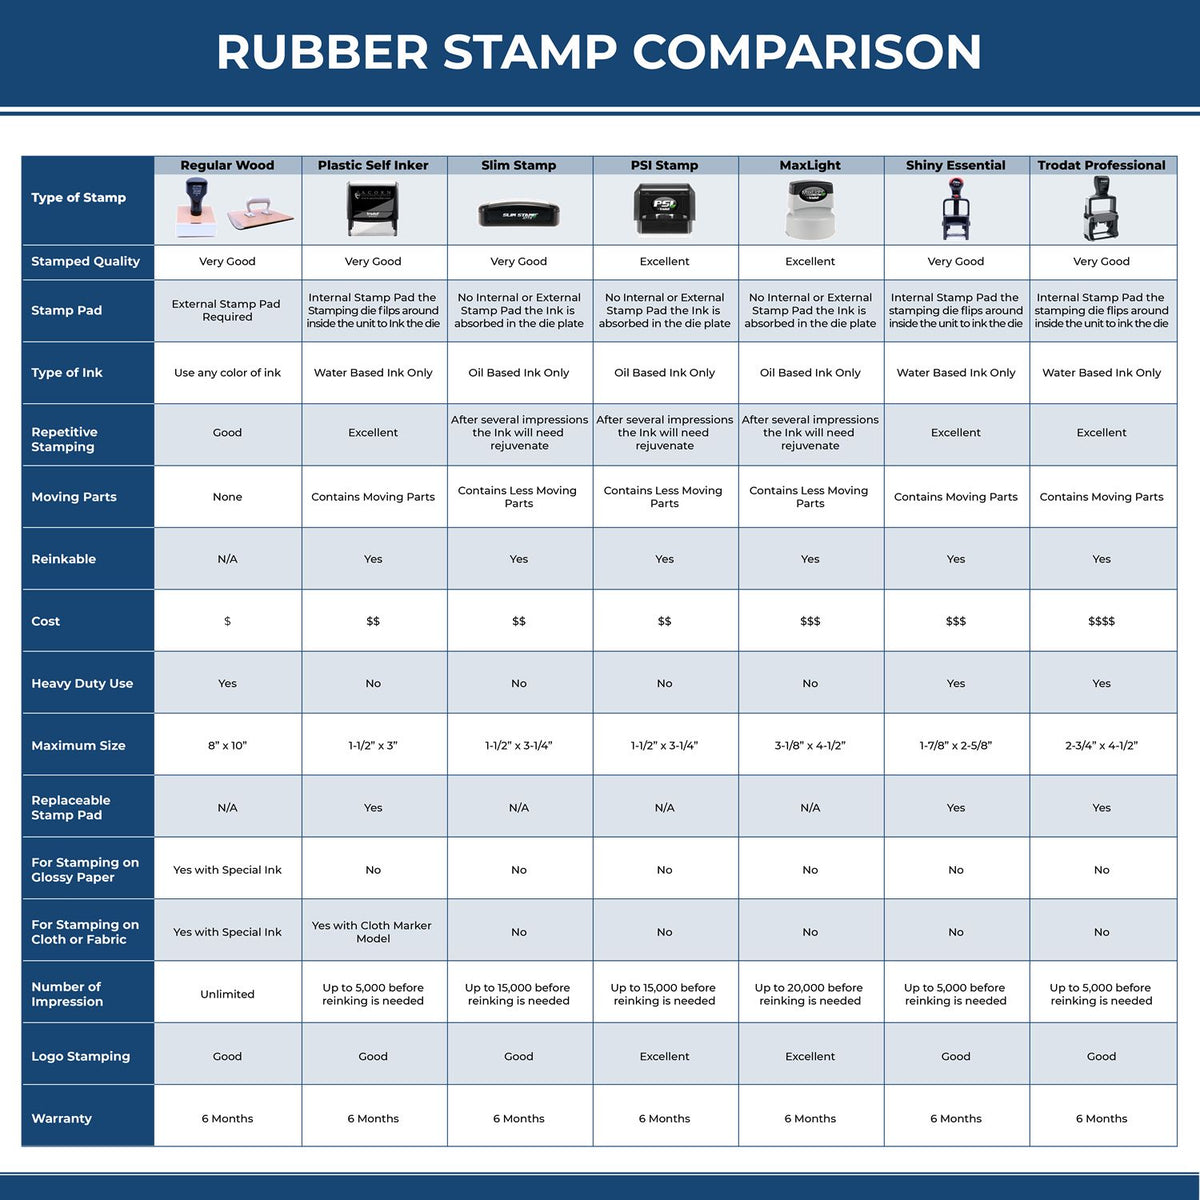 Large Self Inking Urgent Stamp 4156S Rubber Stamp Comparison